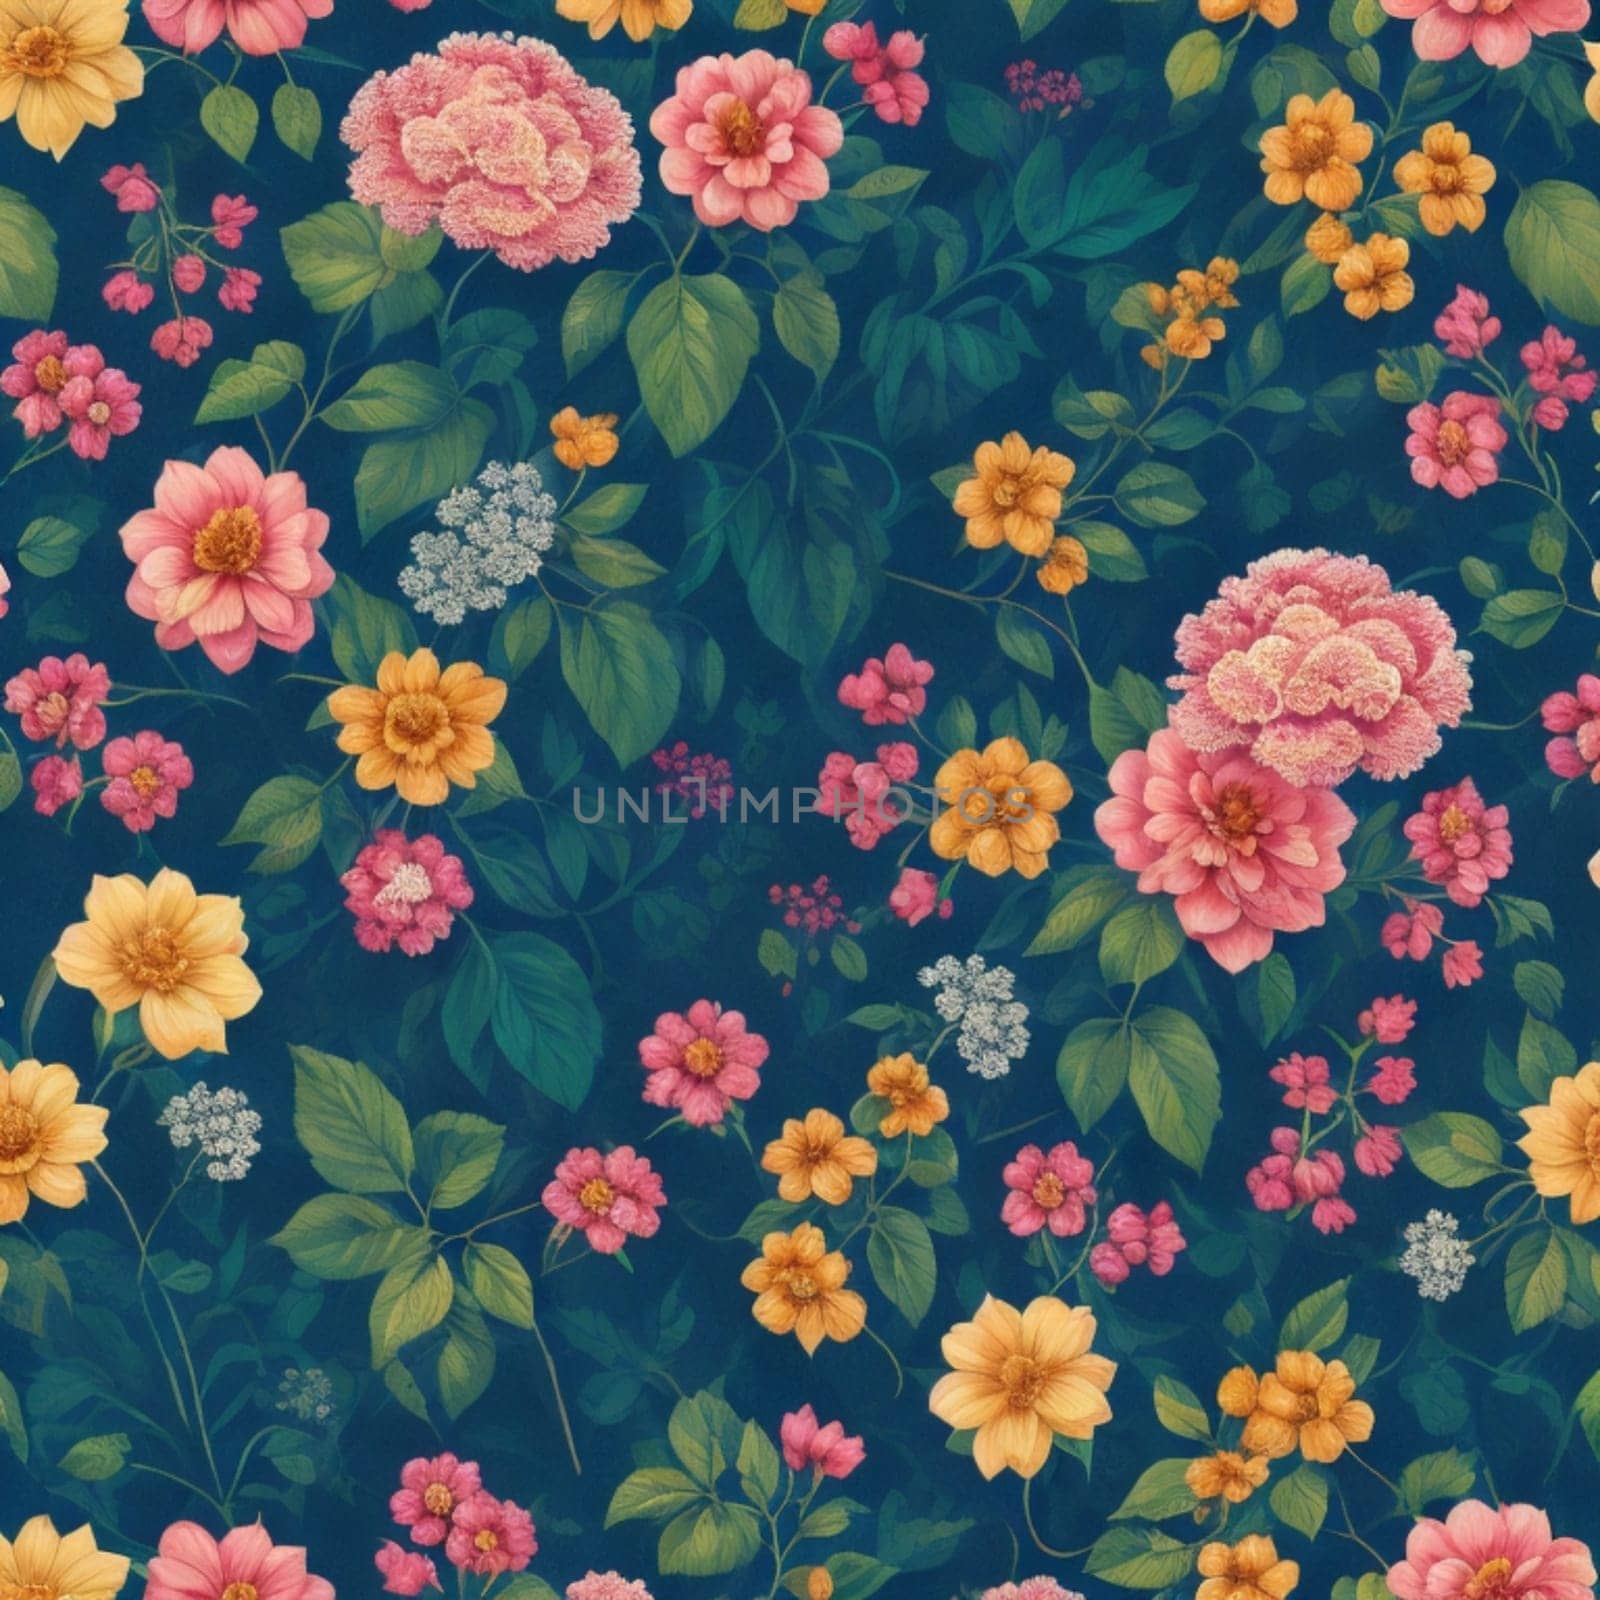 Seamless patterns of flowers and trees repeating design, by verbano